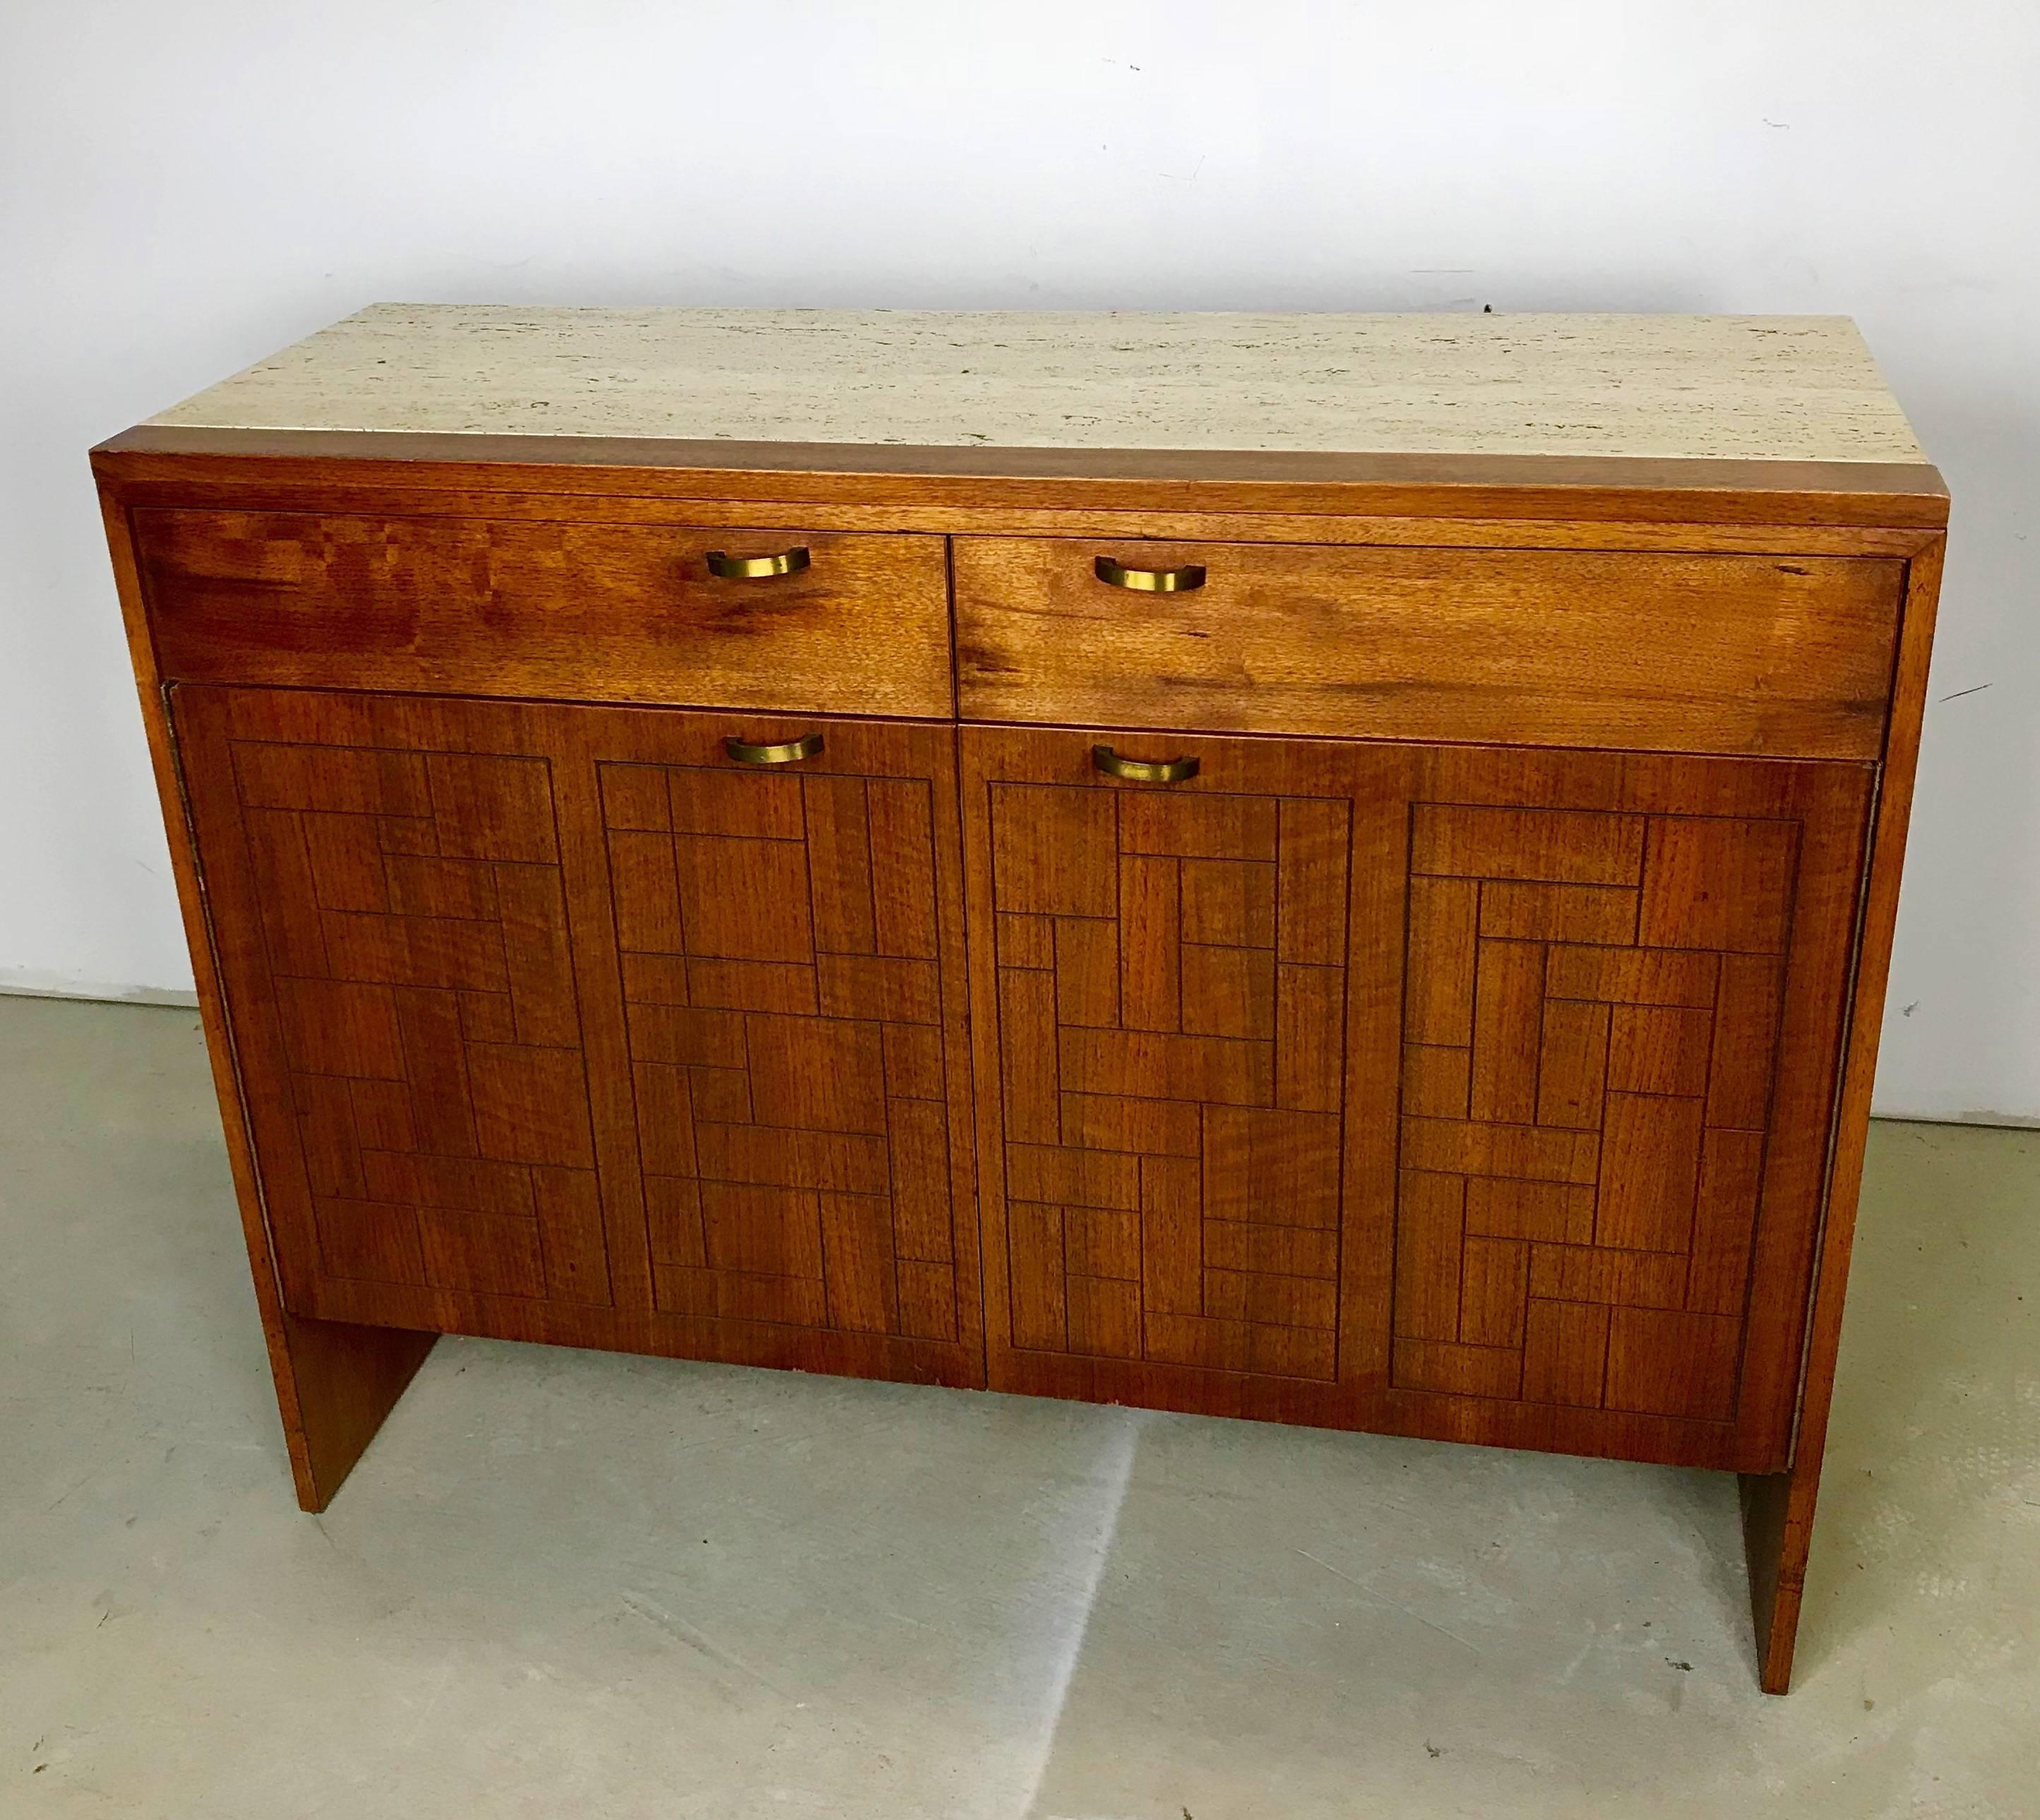 This is a custom design cabinet. It was custom-made and purchased by us from the original owner. The cabinet is beautifully crafted from American walnut, with a travertine marble top and brass hardware. The doors have a wonderful graphic pattern